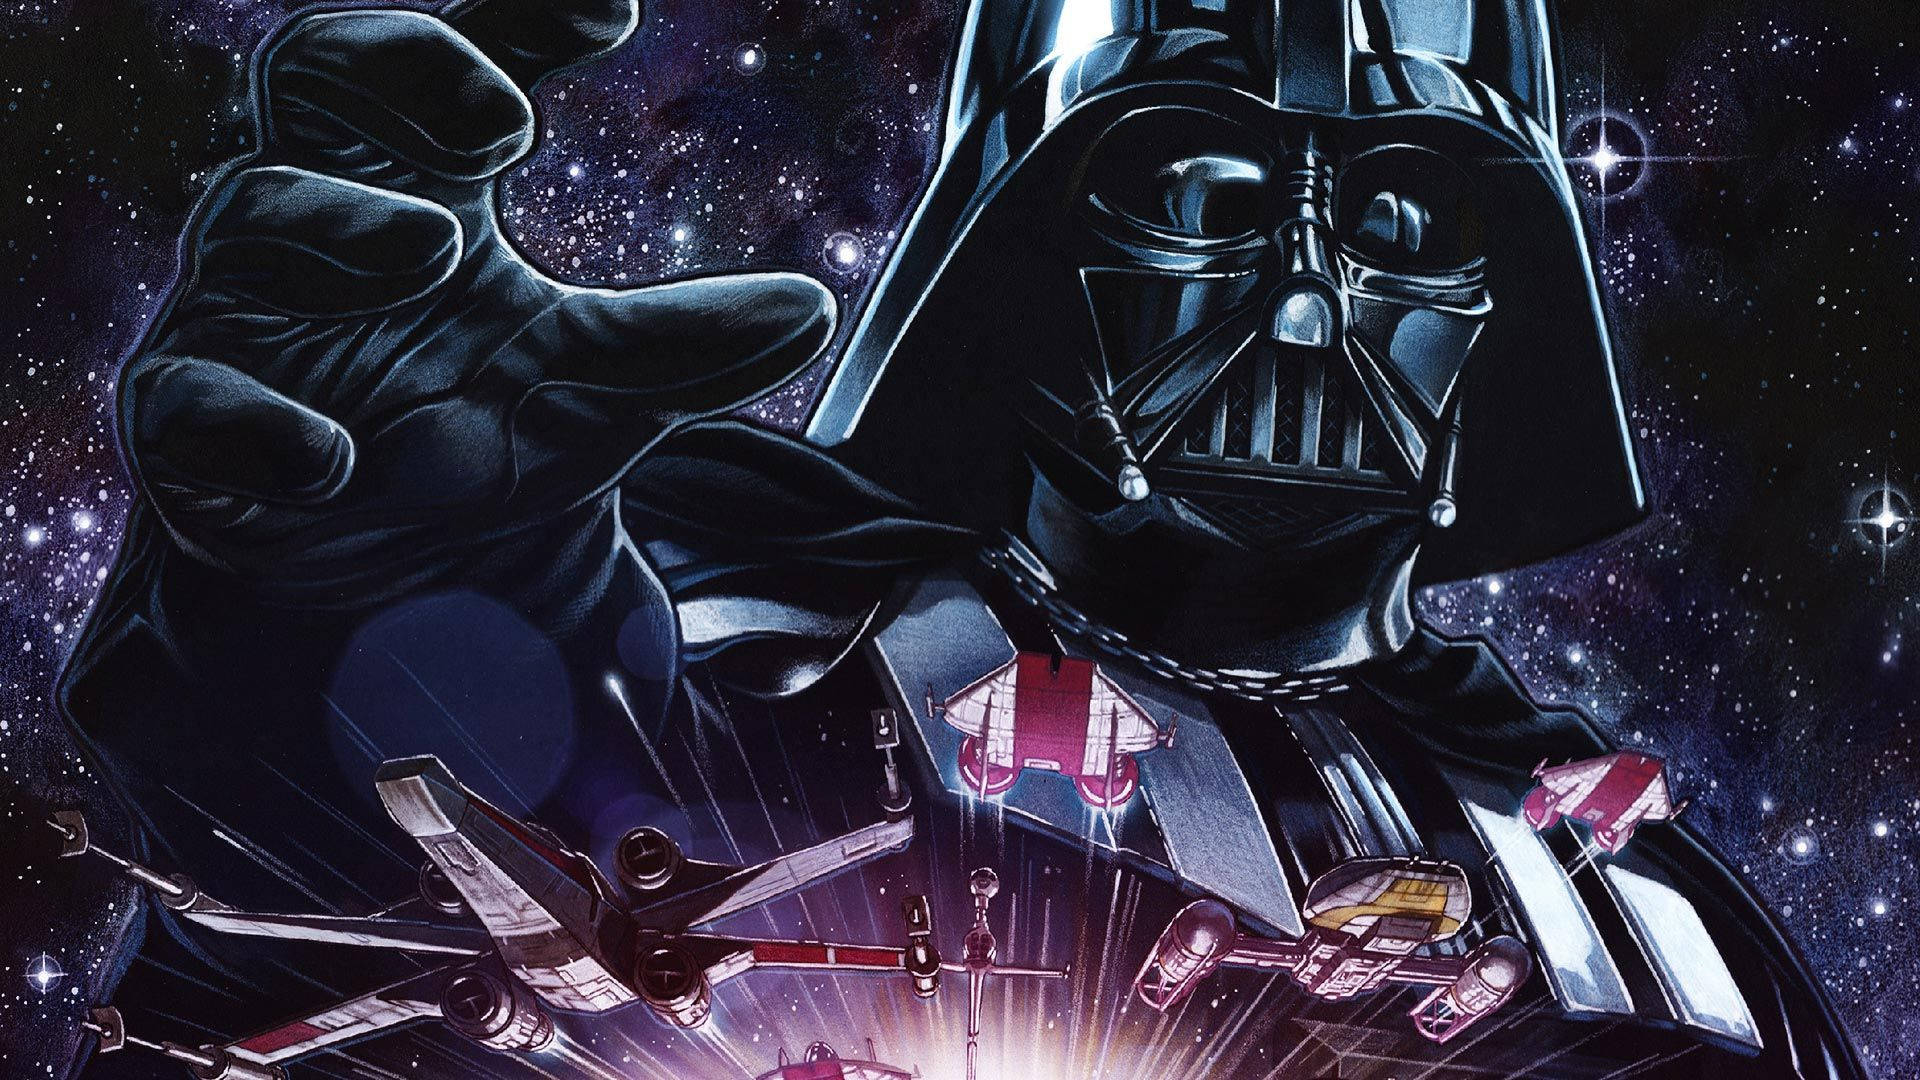 Download Darth Vader in the galaxy, showing his force of power Wallpaper